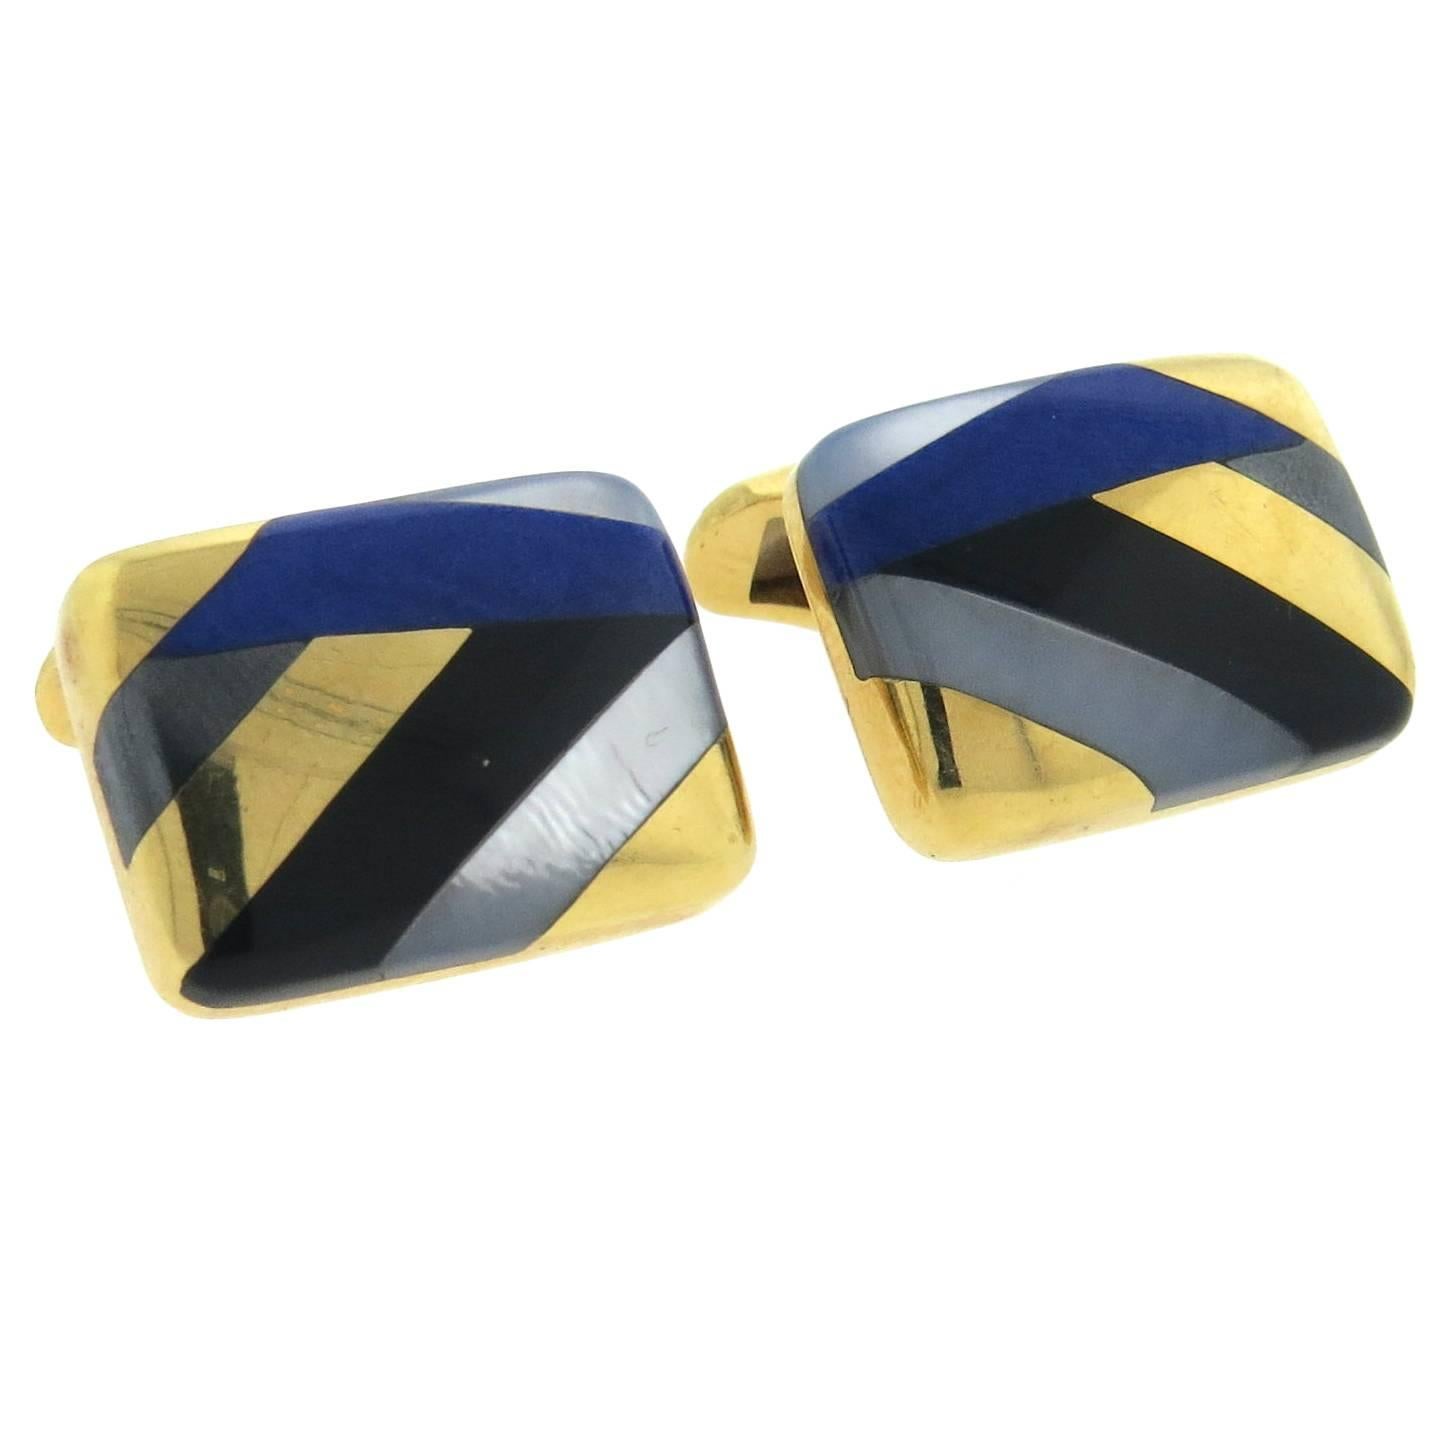 Asch Grossbardt Inlay Onyx Lapis Mother of Pearl Large Gold Cufflinks